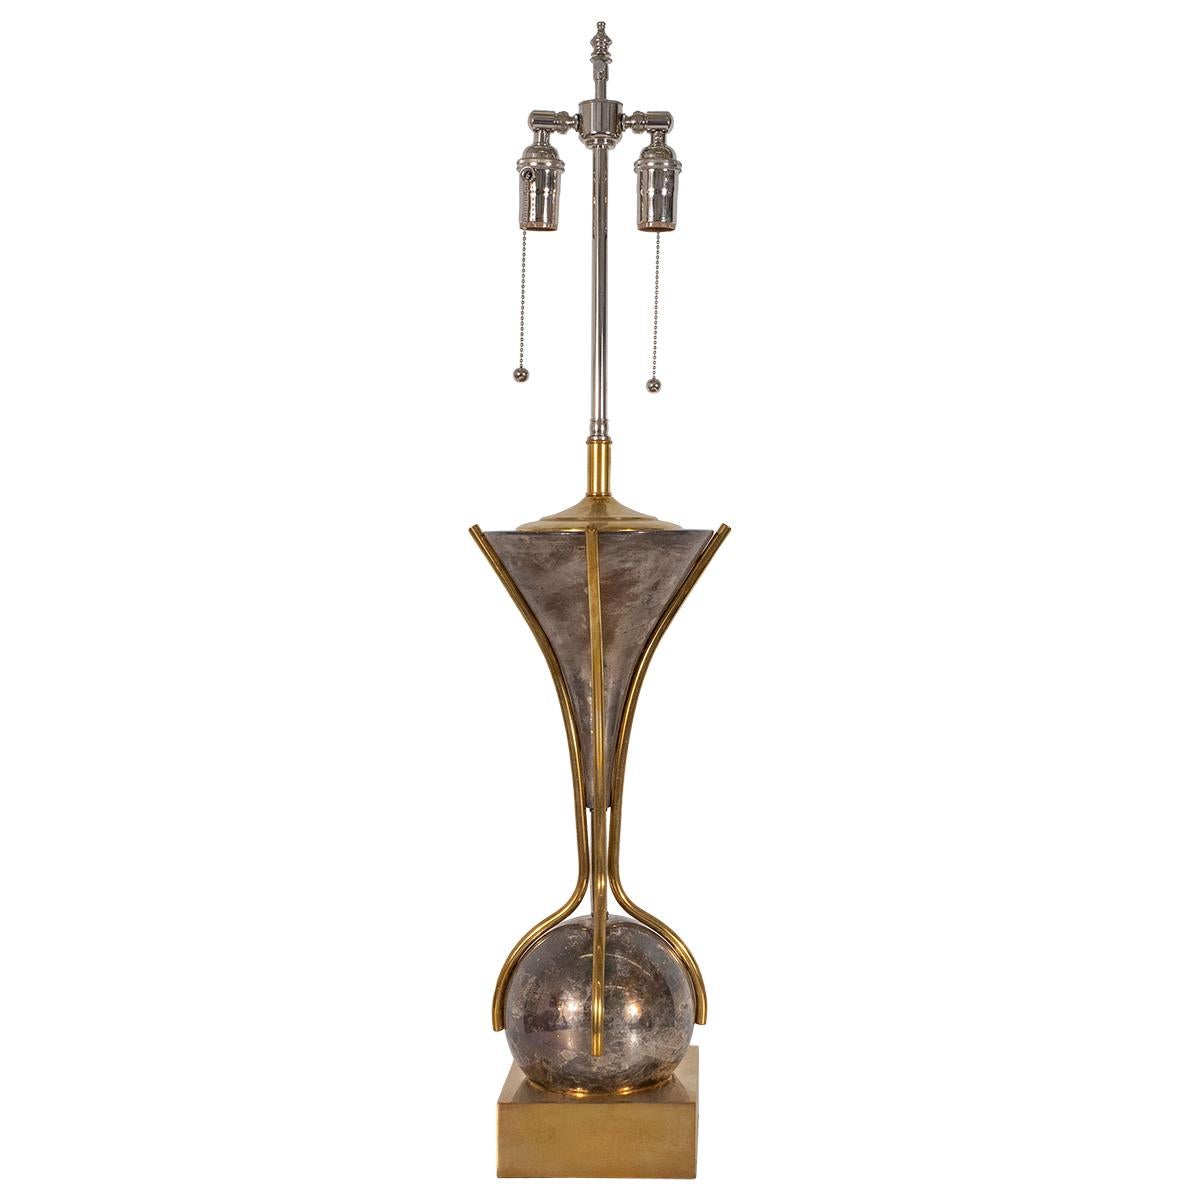 Single brass table lamp with mixed polished brass and silvered brass finish.